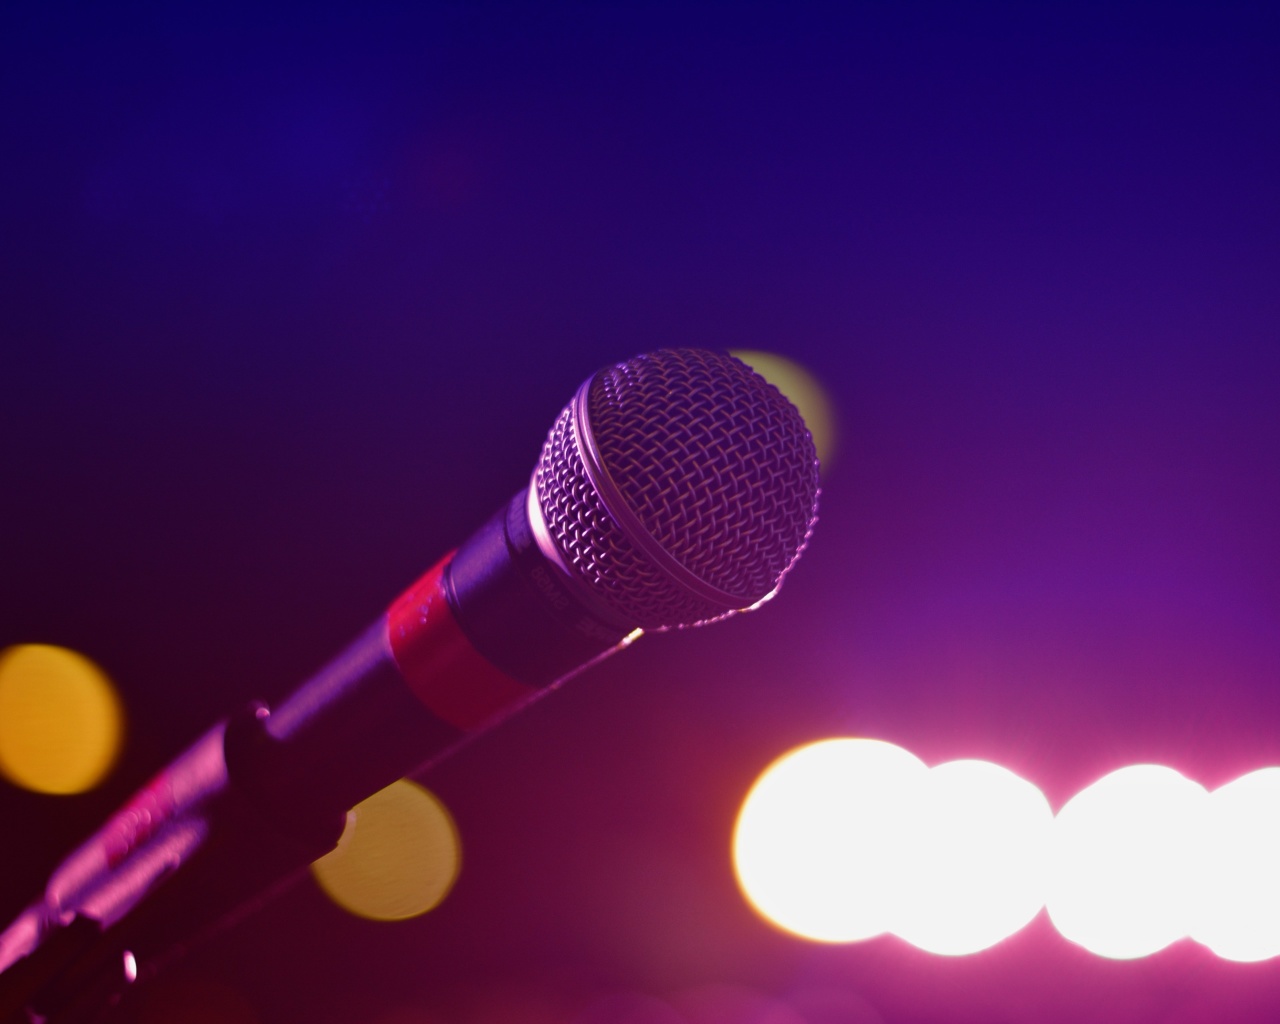 Microphone for Concerts screenshot #1 1280x1024